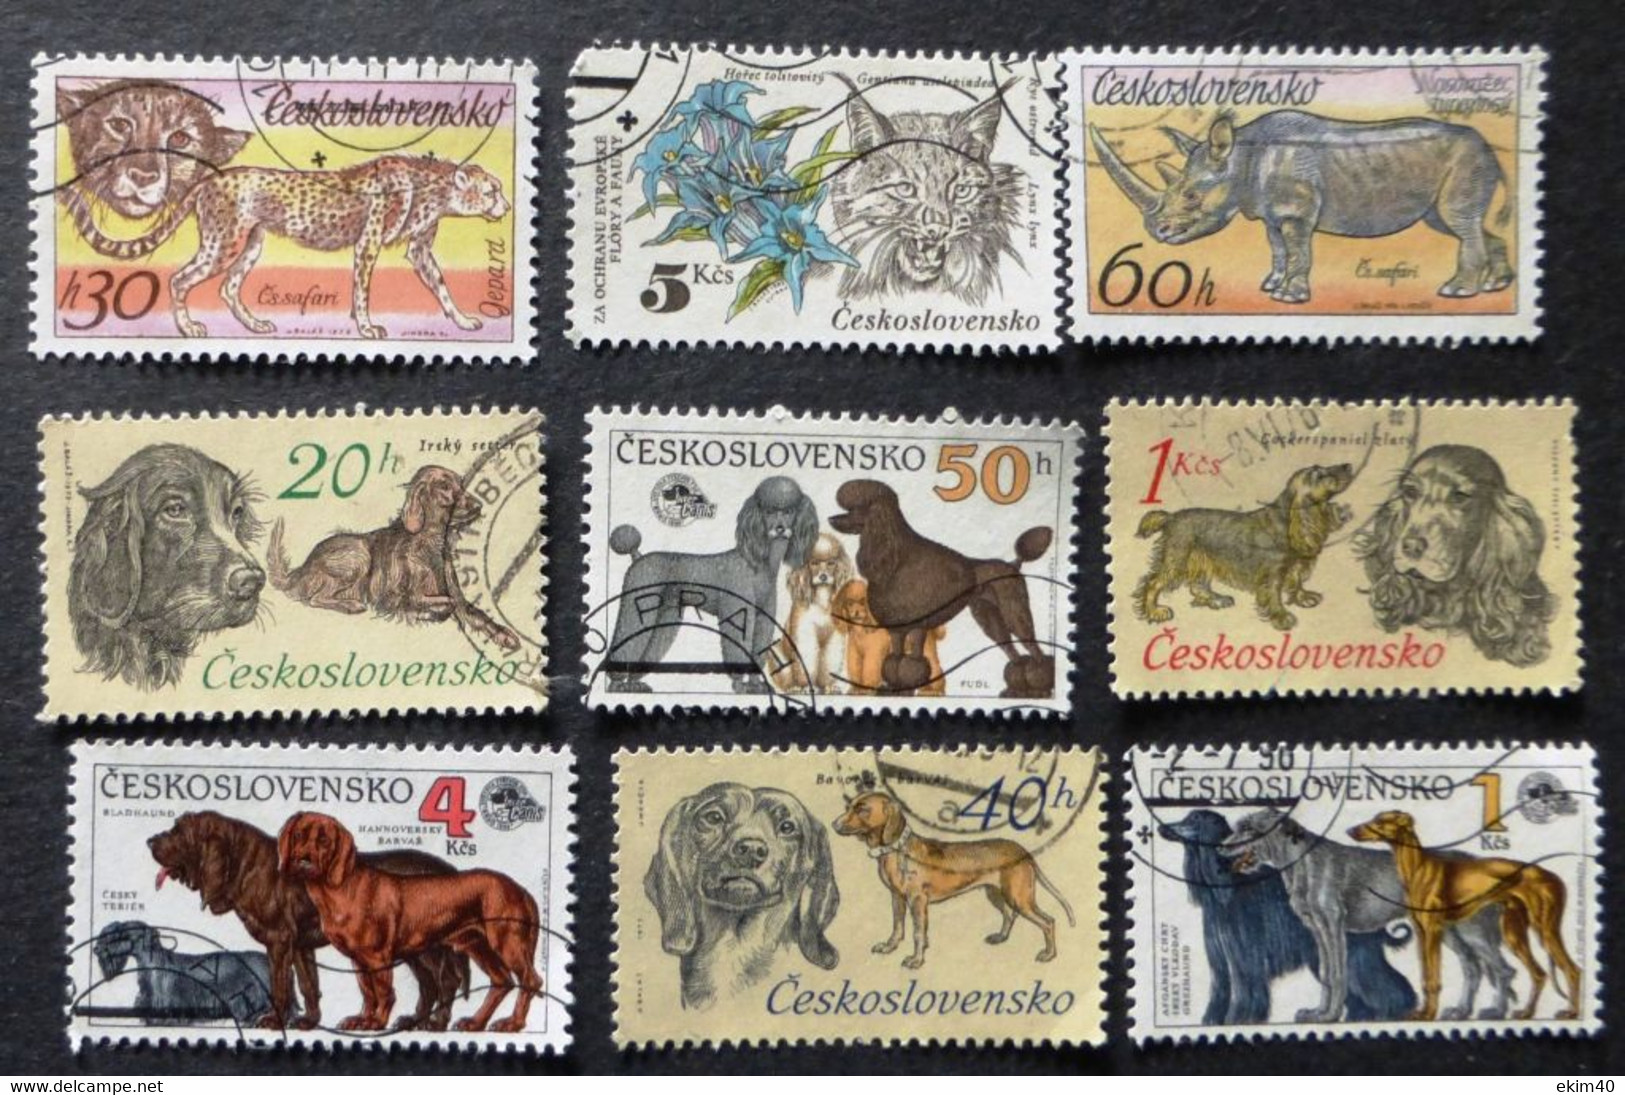 Selection Of Used/Cancelled Stamps From Czechoslovakia Wild & Domestic Animals. No DC-319 - Used Stamps